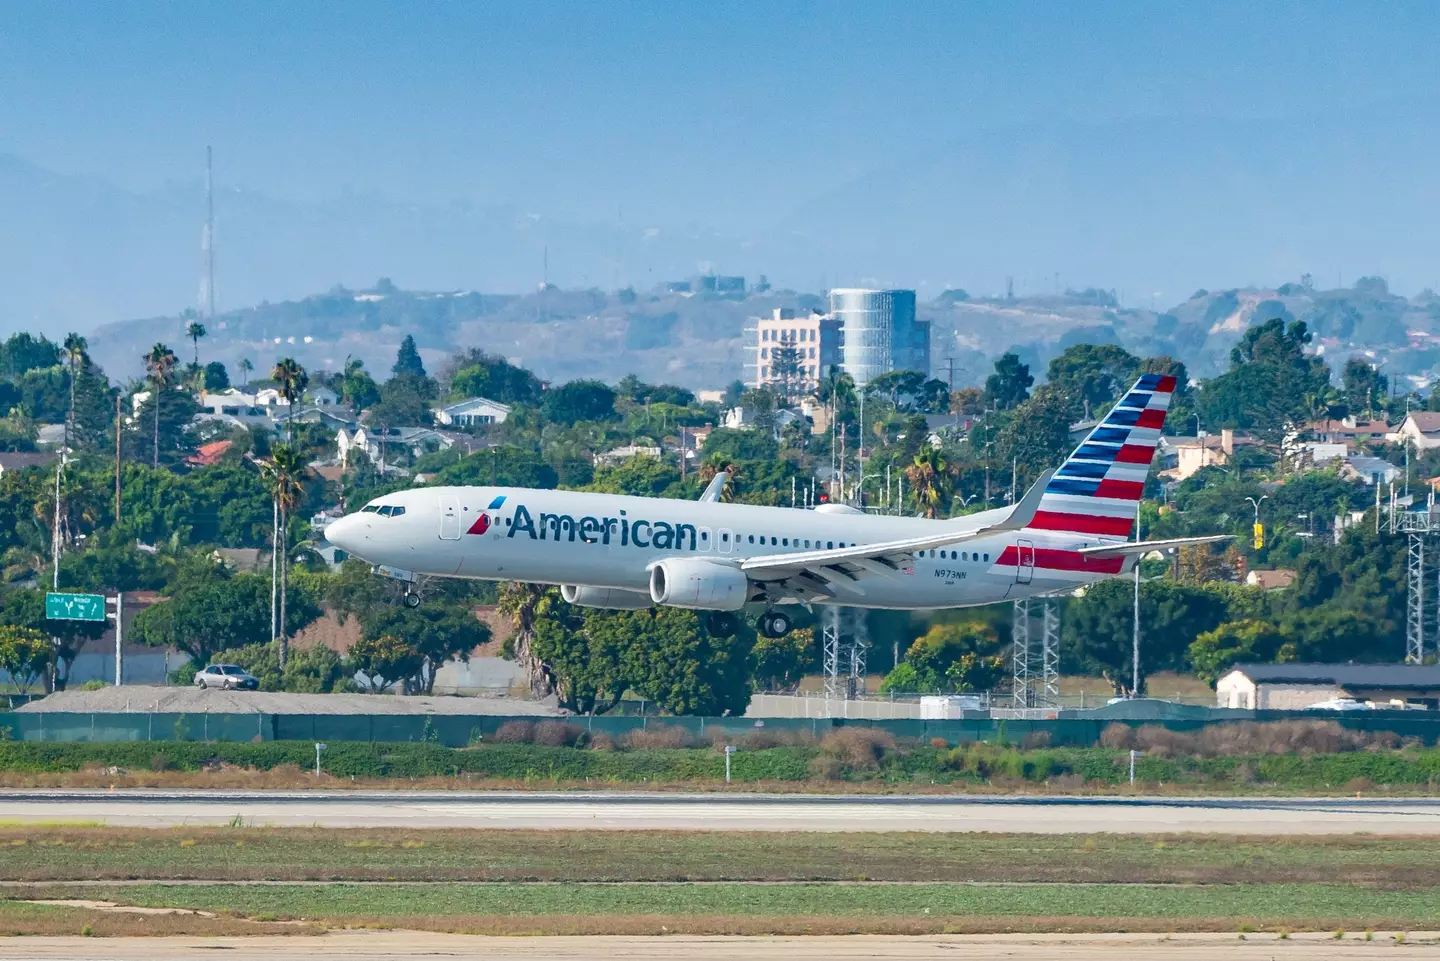 The incident took place on an American Airlines flight.